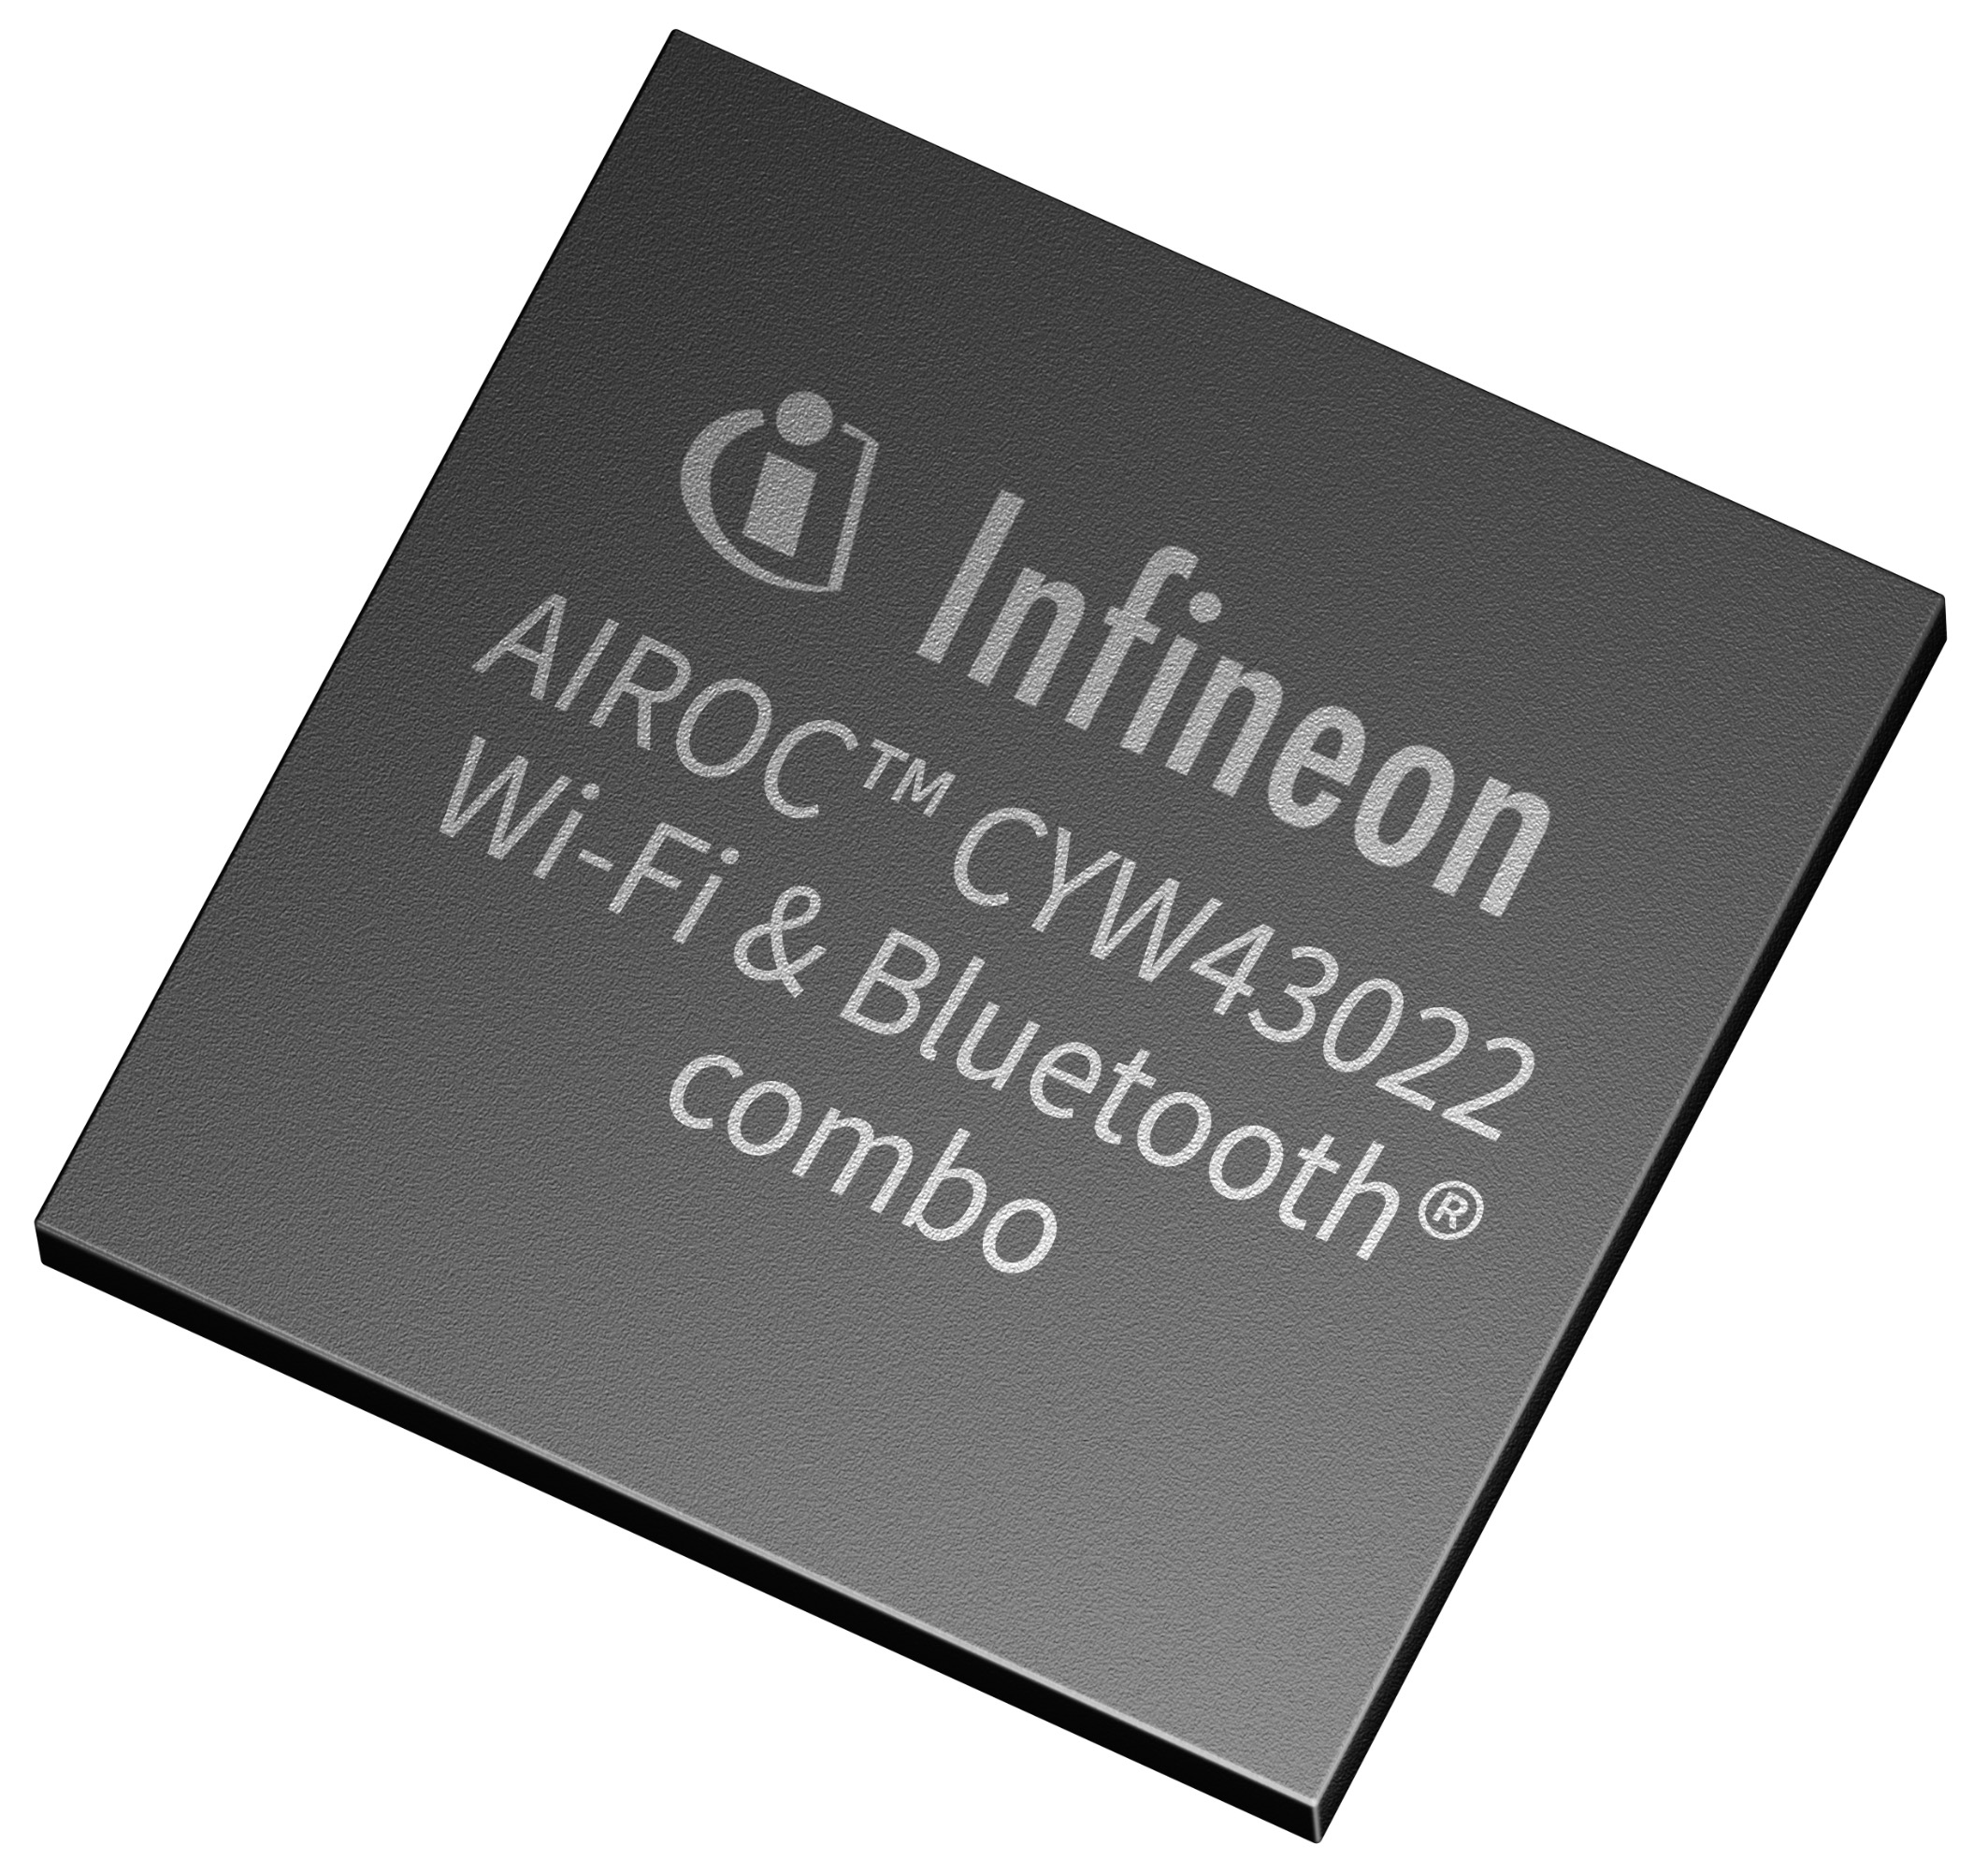 Infineon introduces AIROC™ CYW43022 Wi-Fi 5 and Bluetooth® 2-in-1 product, which reduces power consumption by 65%, significantly extending battery life in IoT applications - 圖片